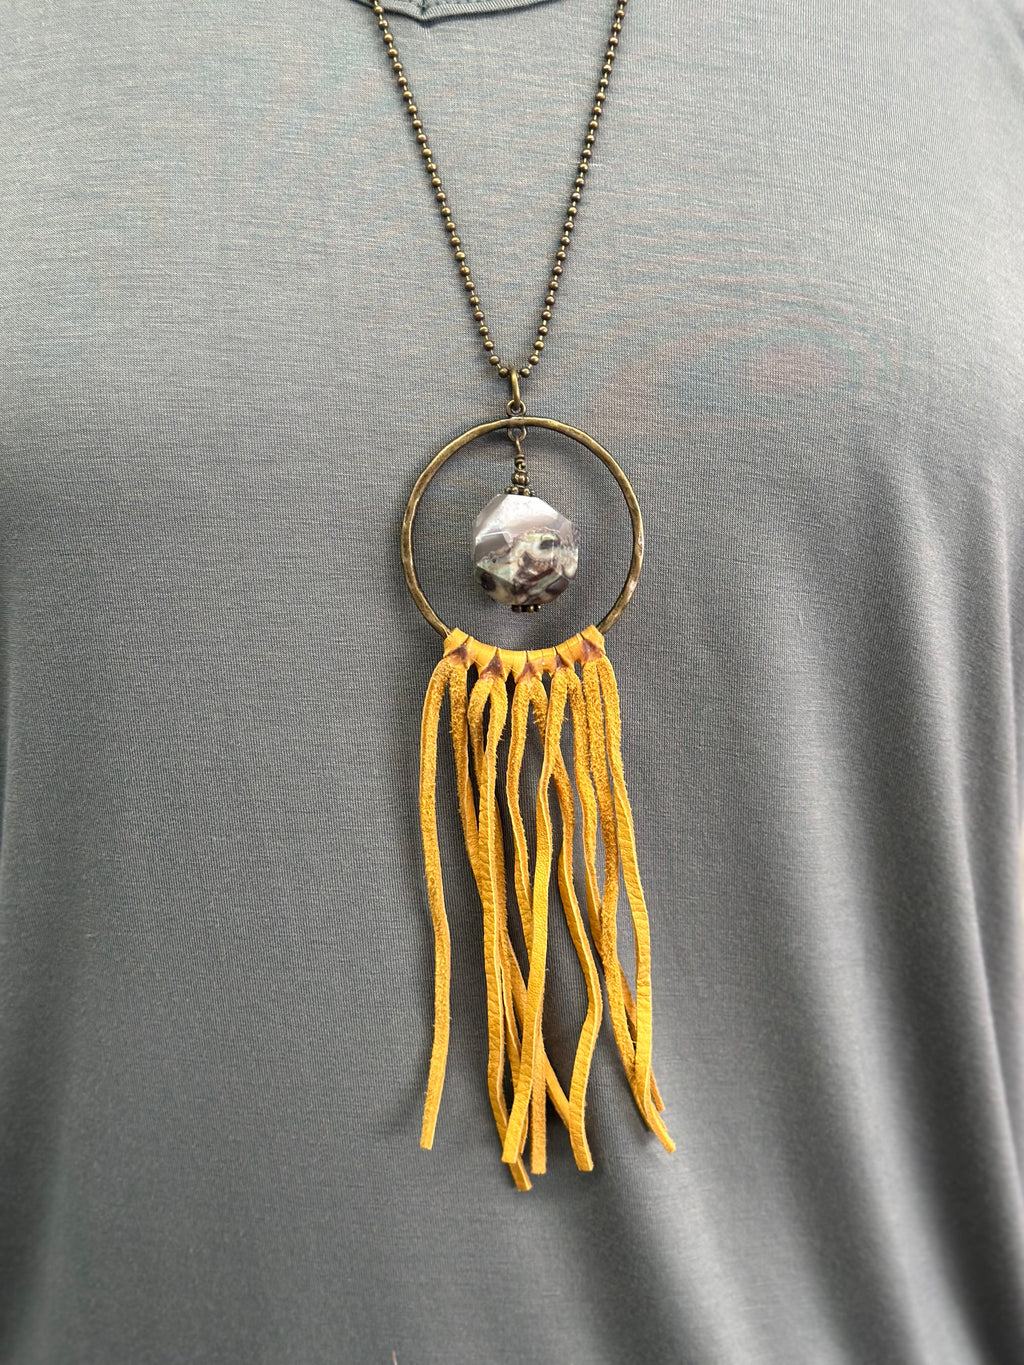 Necklace l Long Circle with Yellow Tassels + Gemstone